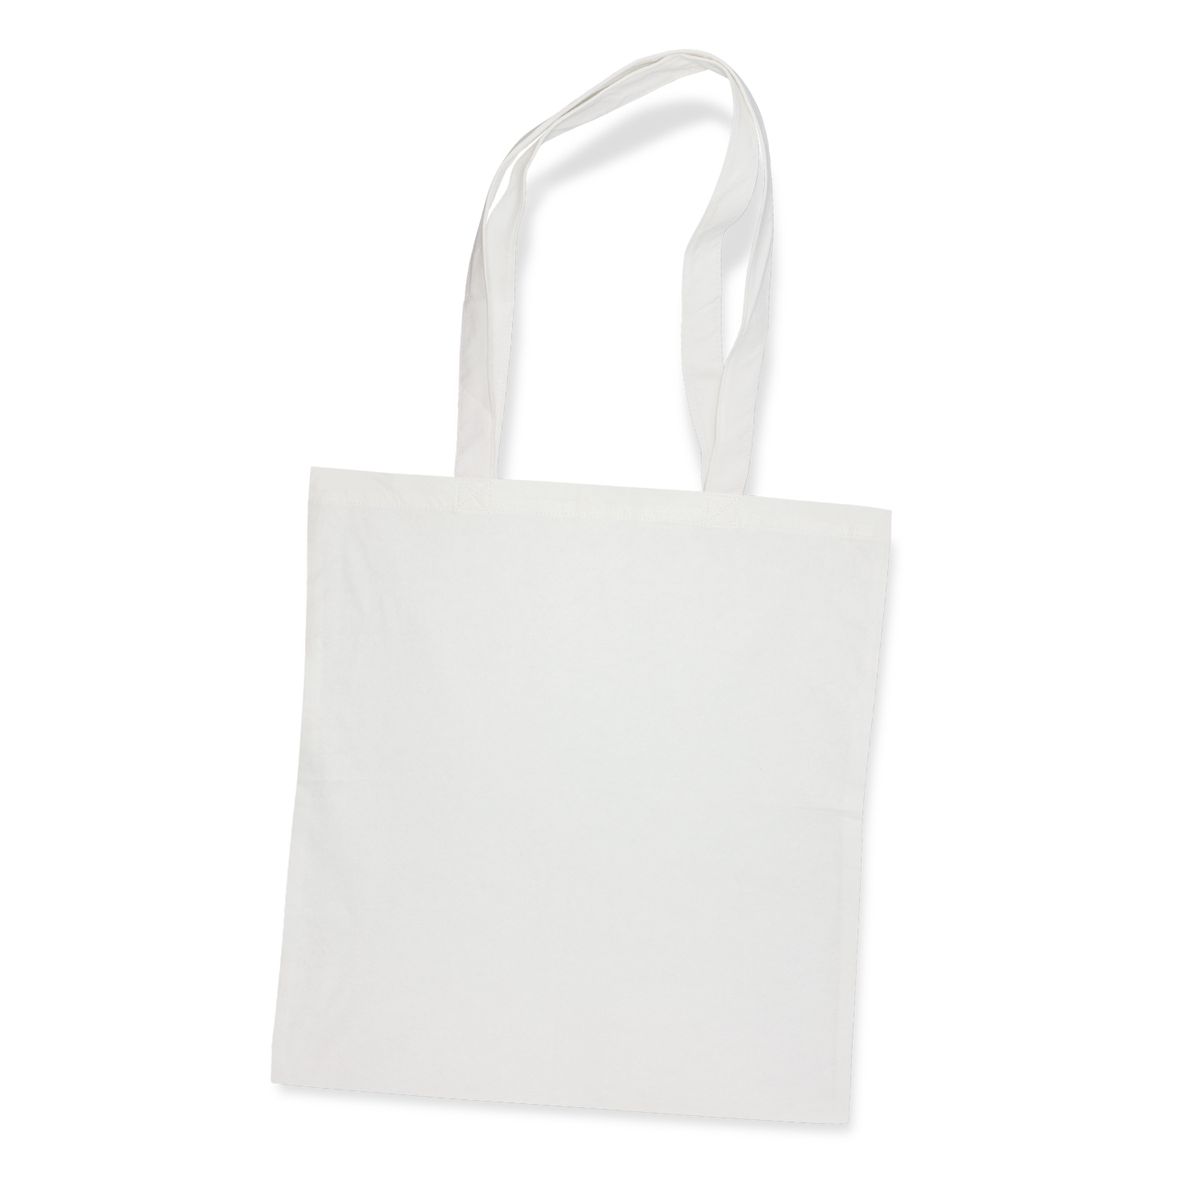 Bamboo Tote Bag - Modern Promotions